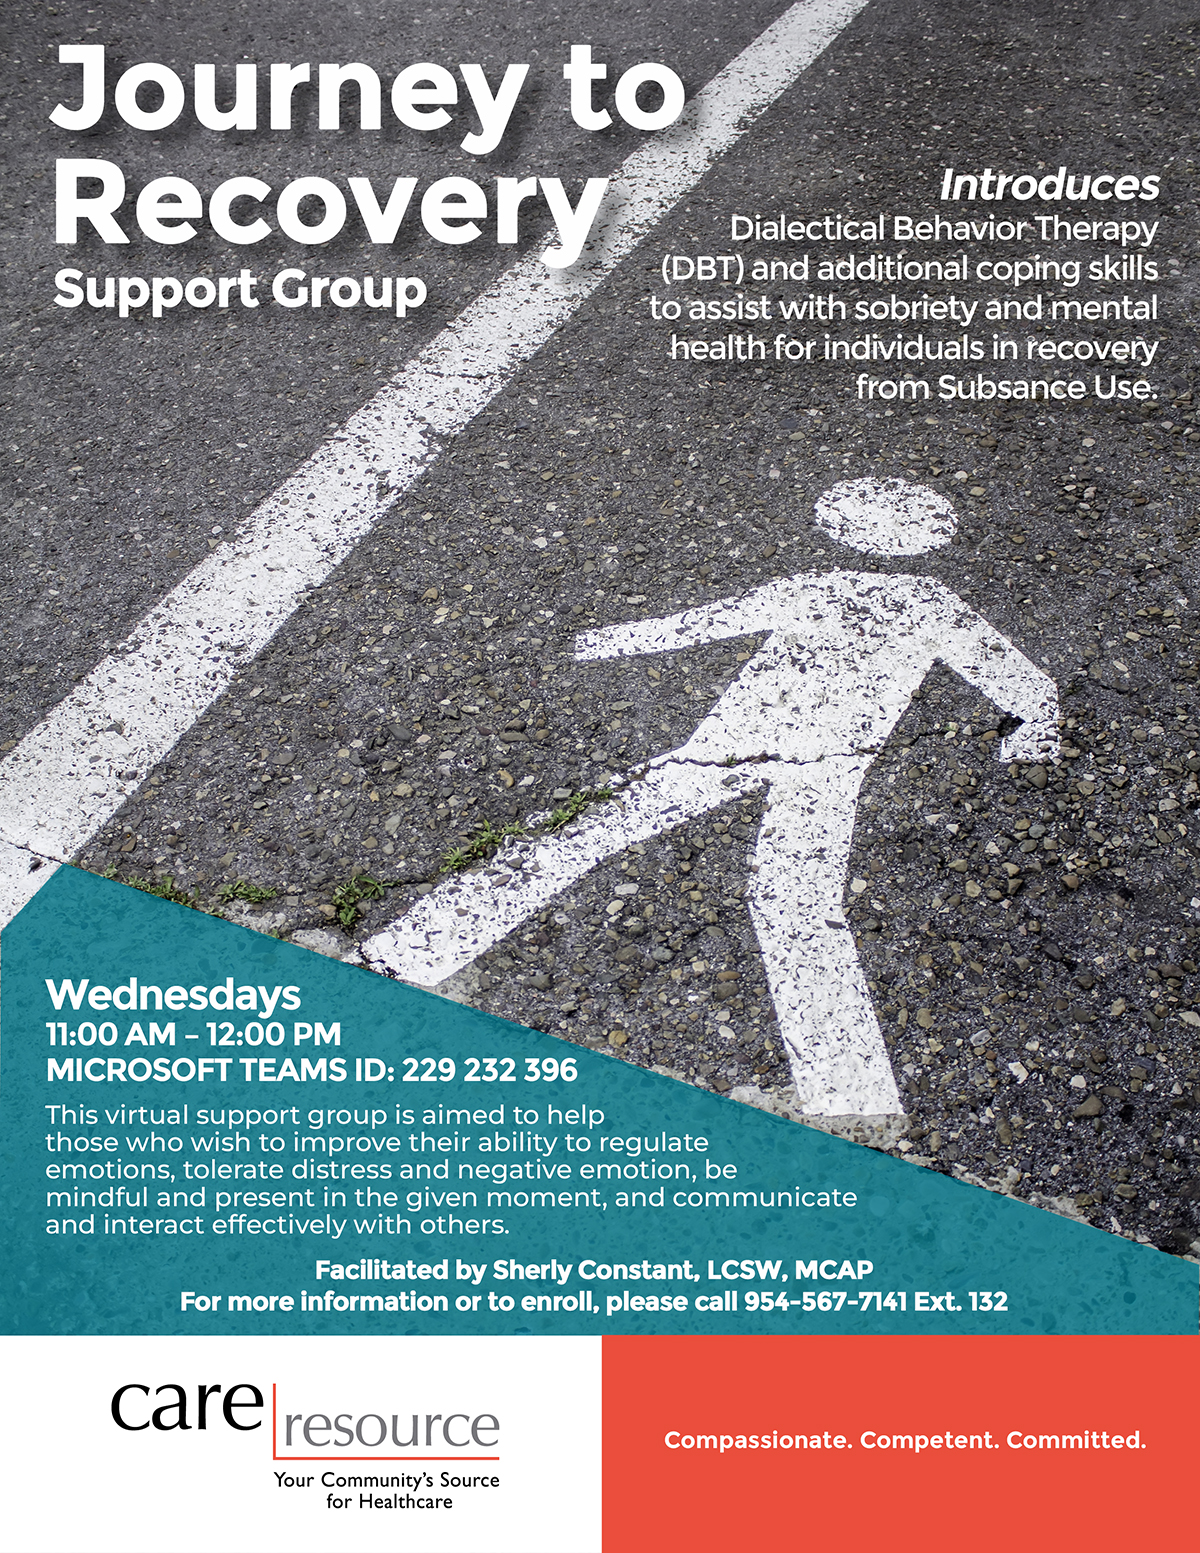 Journey to Recovery Support Group